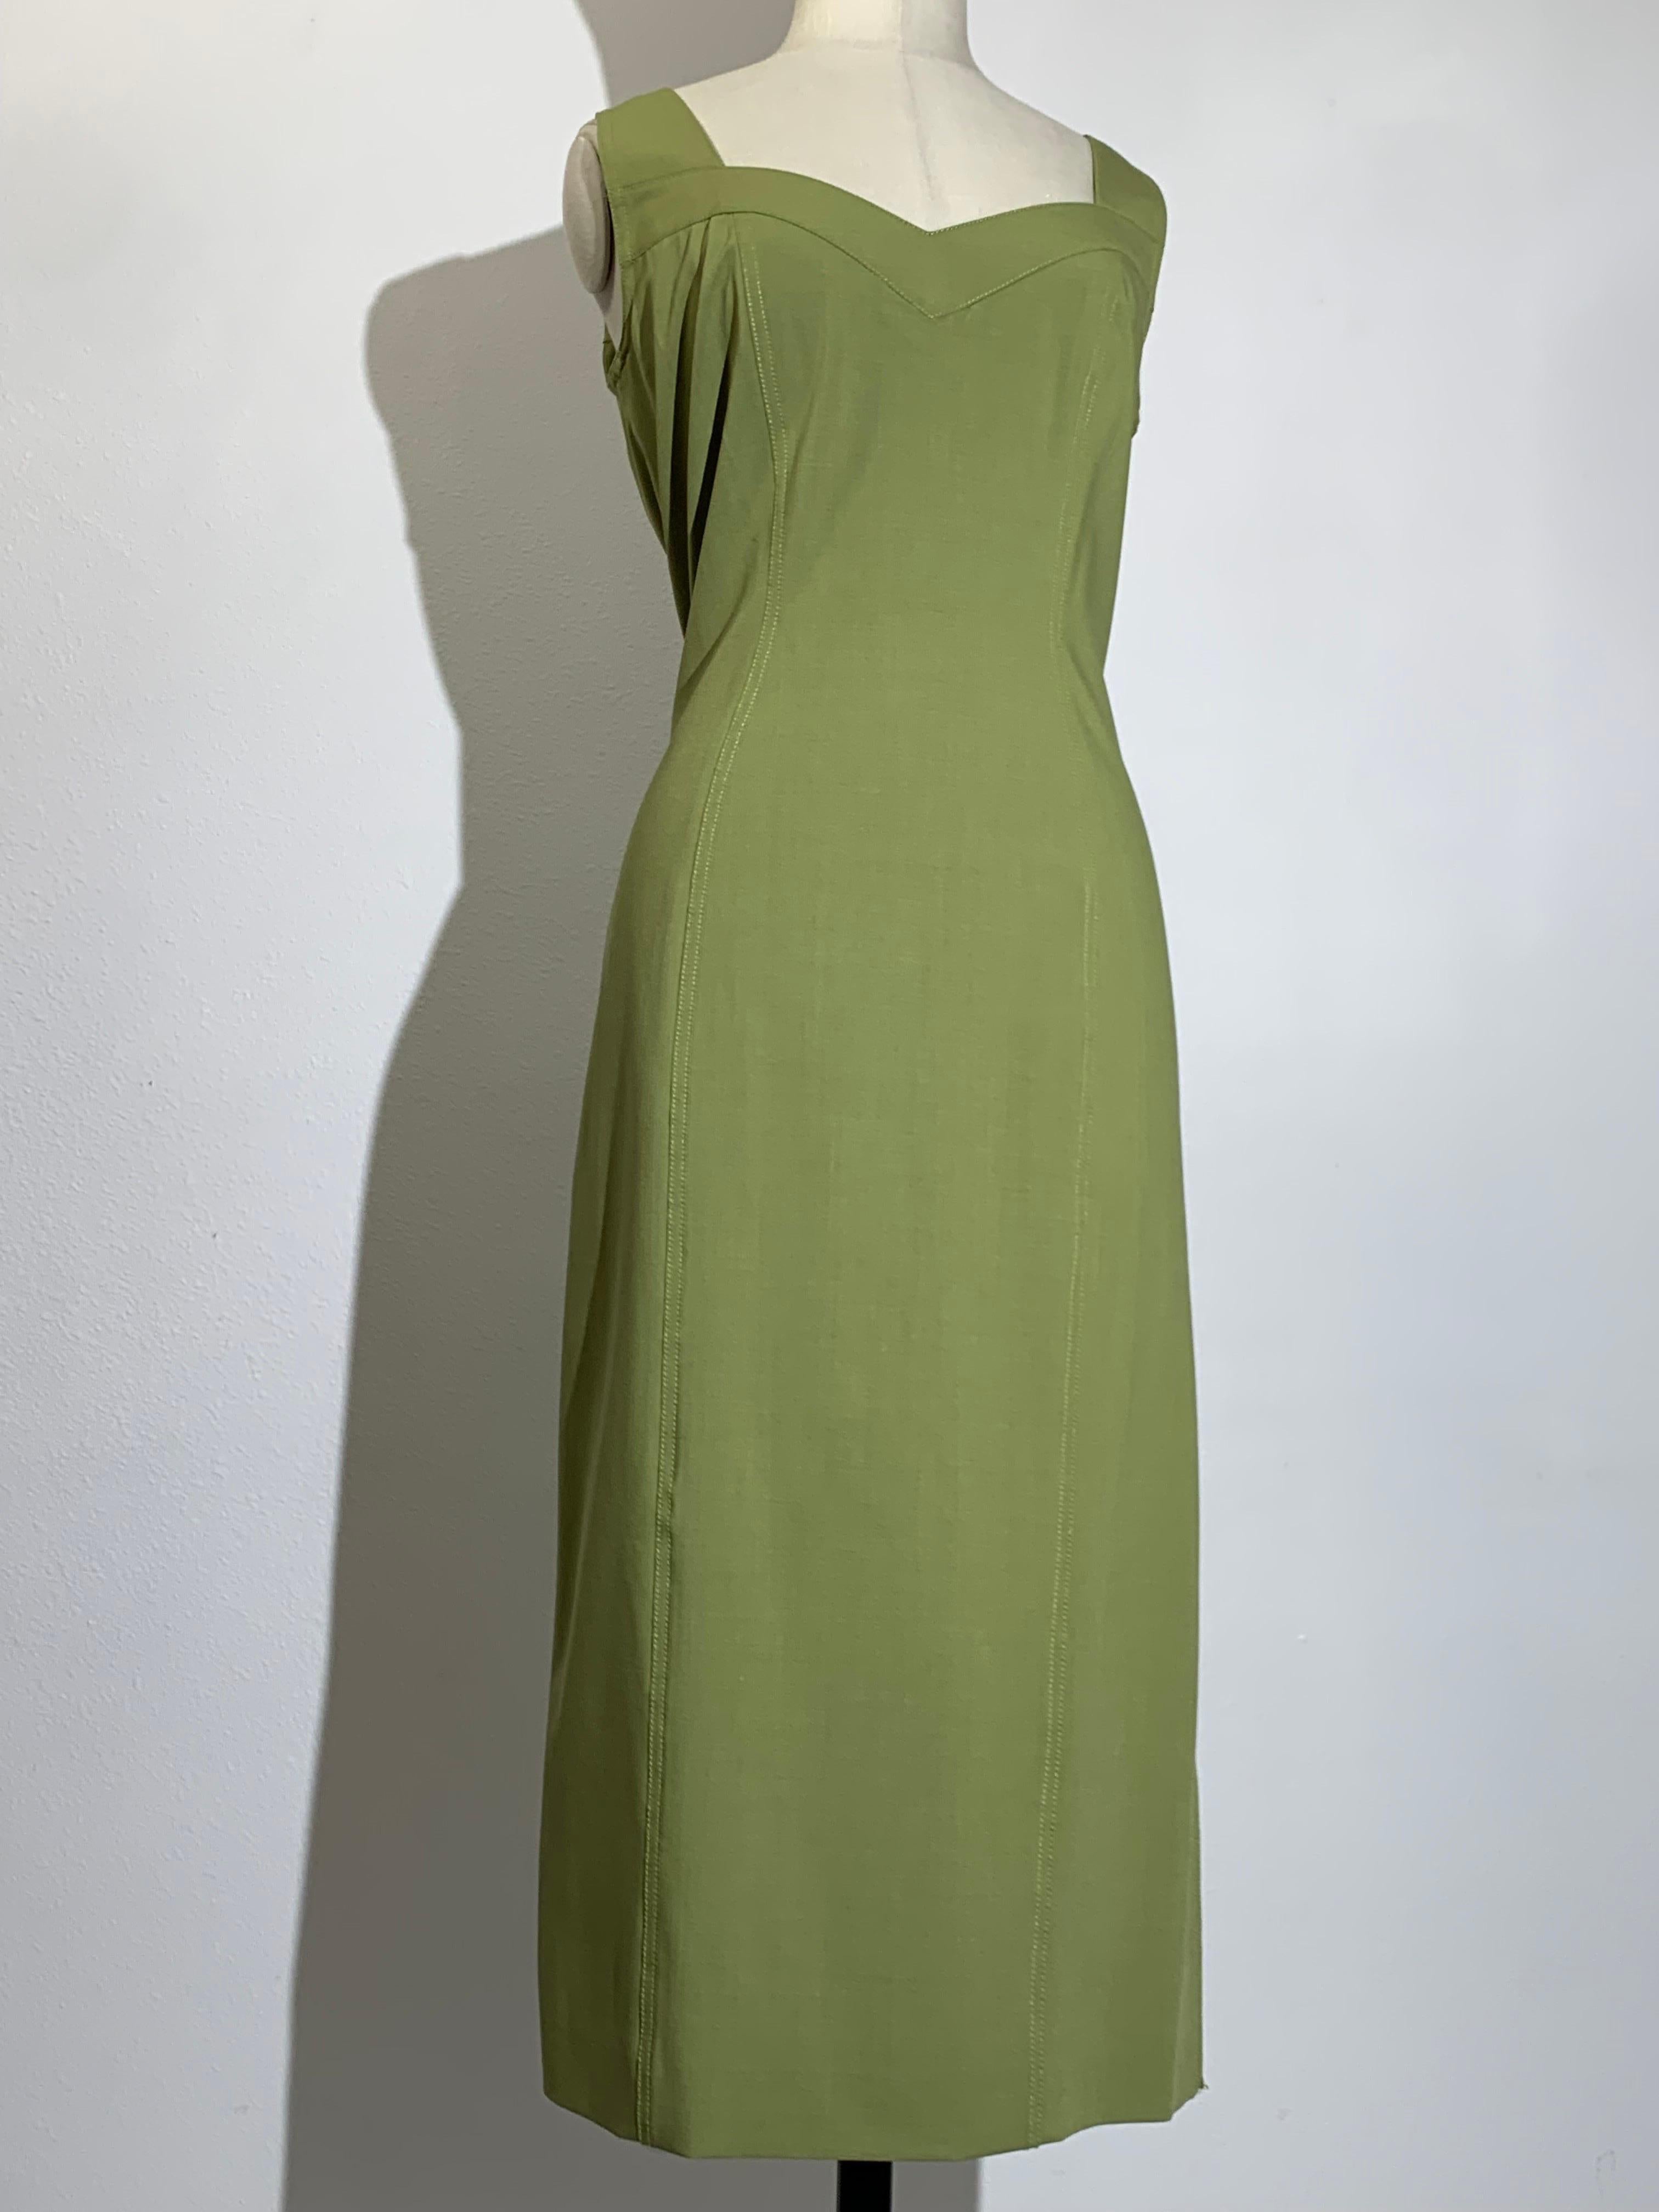 1990s John Galliano Sage Green Lightweight Wool Stretch Sheath Dress:  Sleeveless summer-weight wool dress with sweetheart neckline at front and back. Fully lined in silk charmeuse. Back zipper. Fits a US size 12